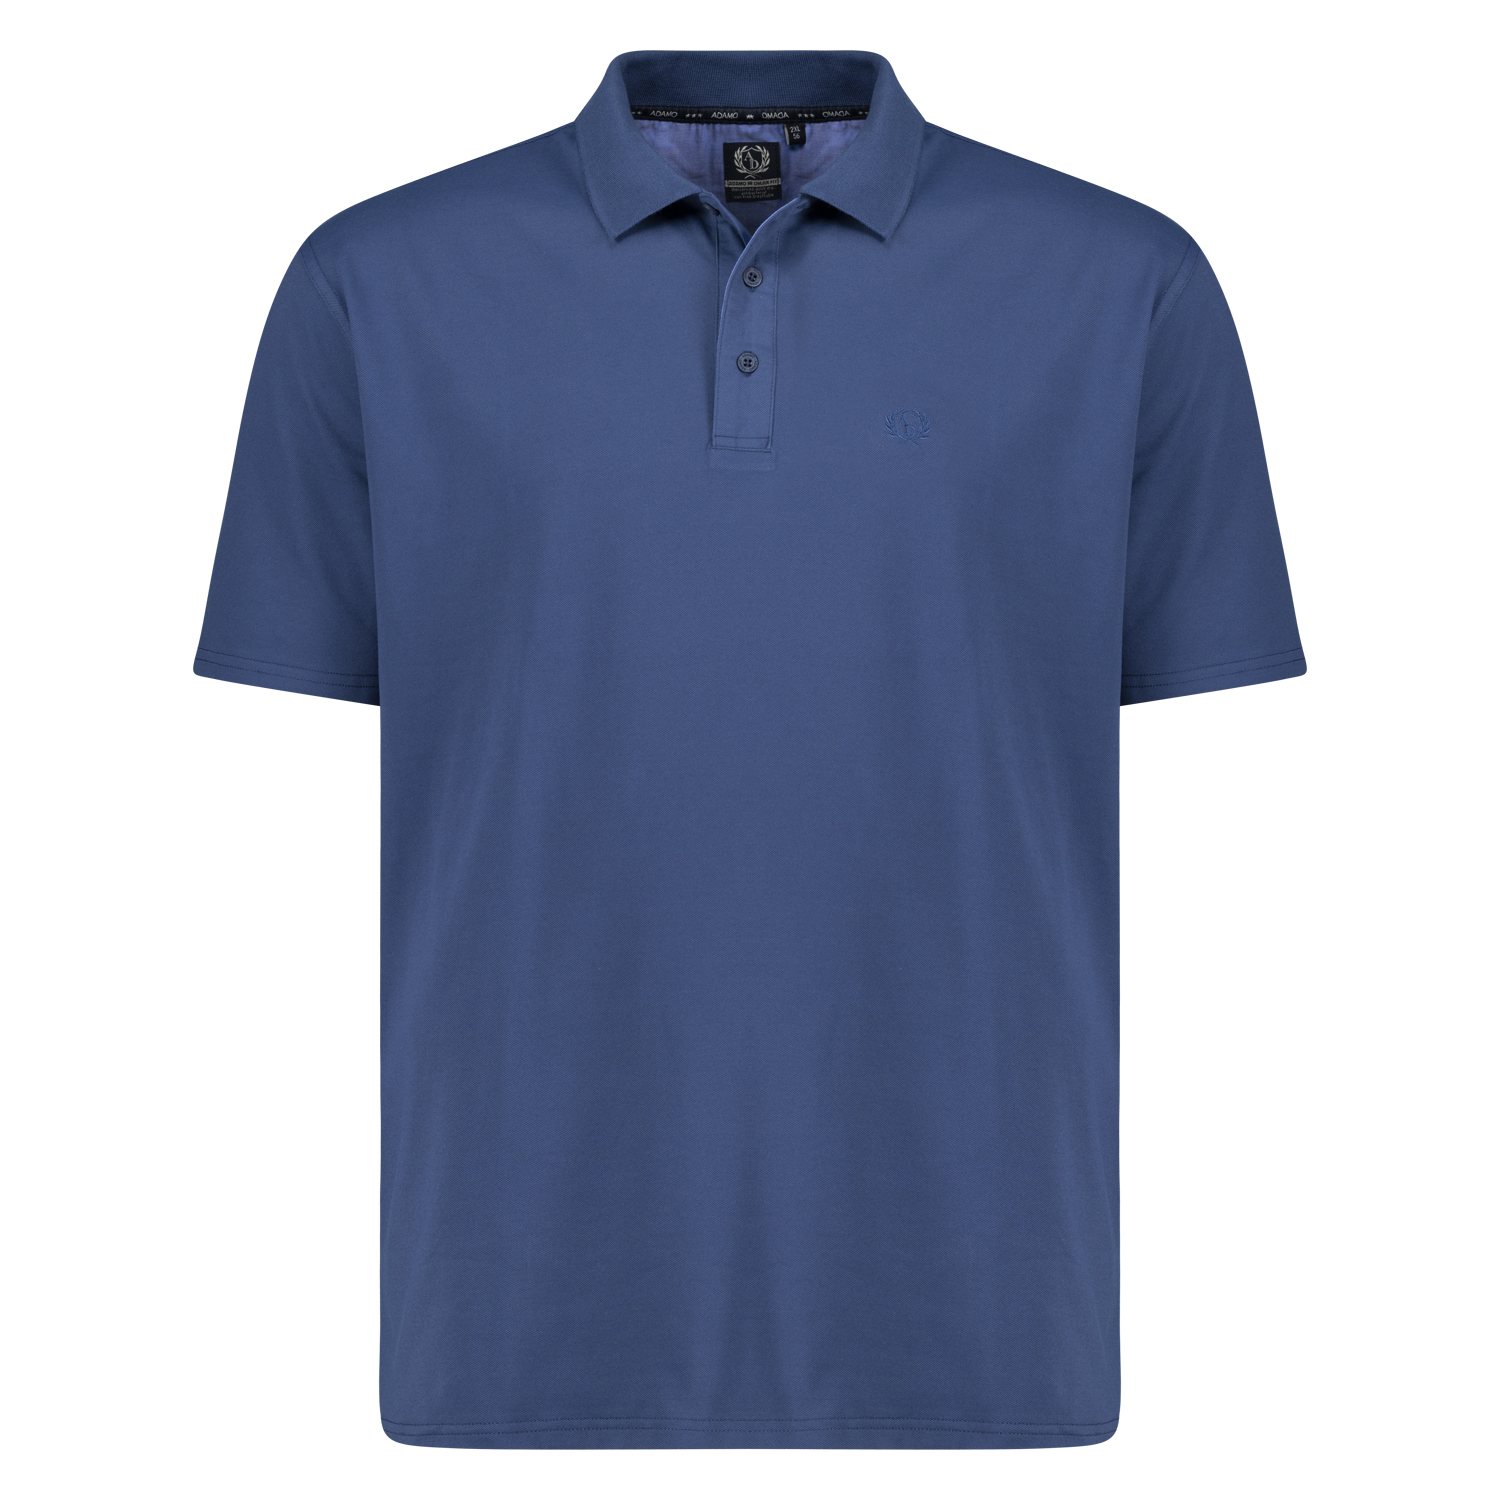 Admiral blue short sleeve polo shirt PICCO by ADAMO for men in large sizes up to 12XL